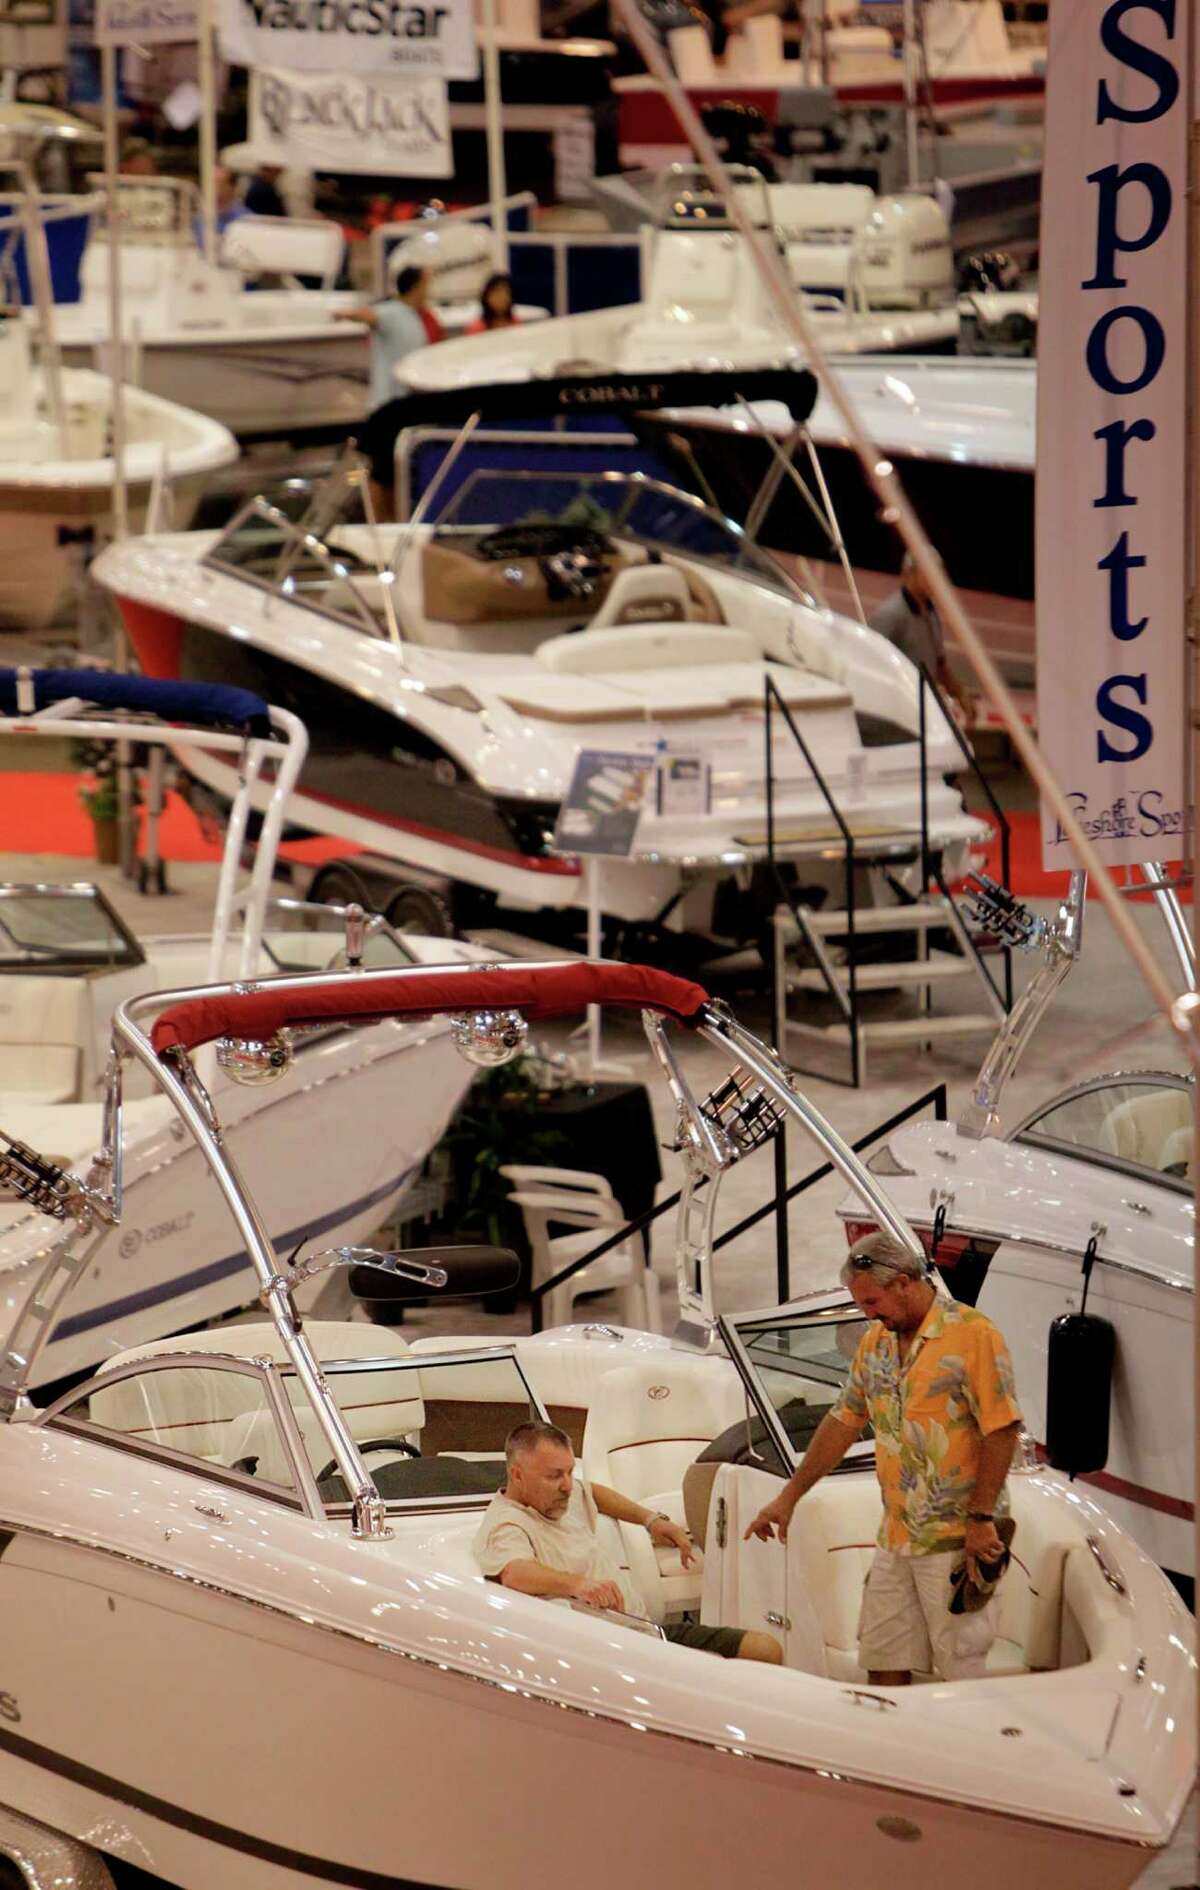 Hundreds of boats are on display during the 25th Annual Houston Summer Boat Show at Reliant Center.